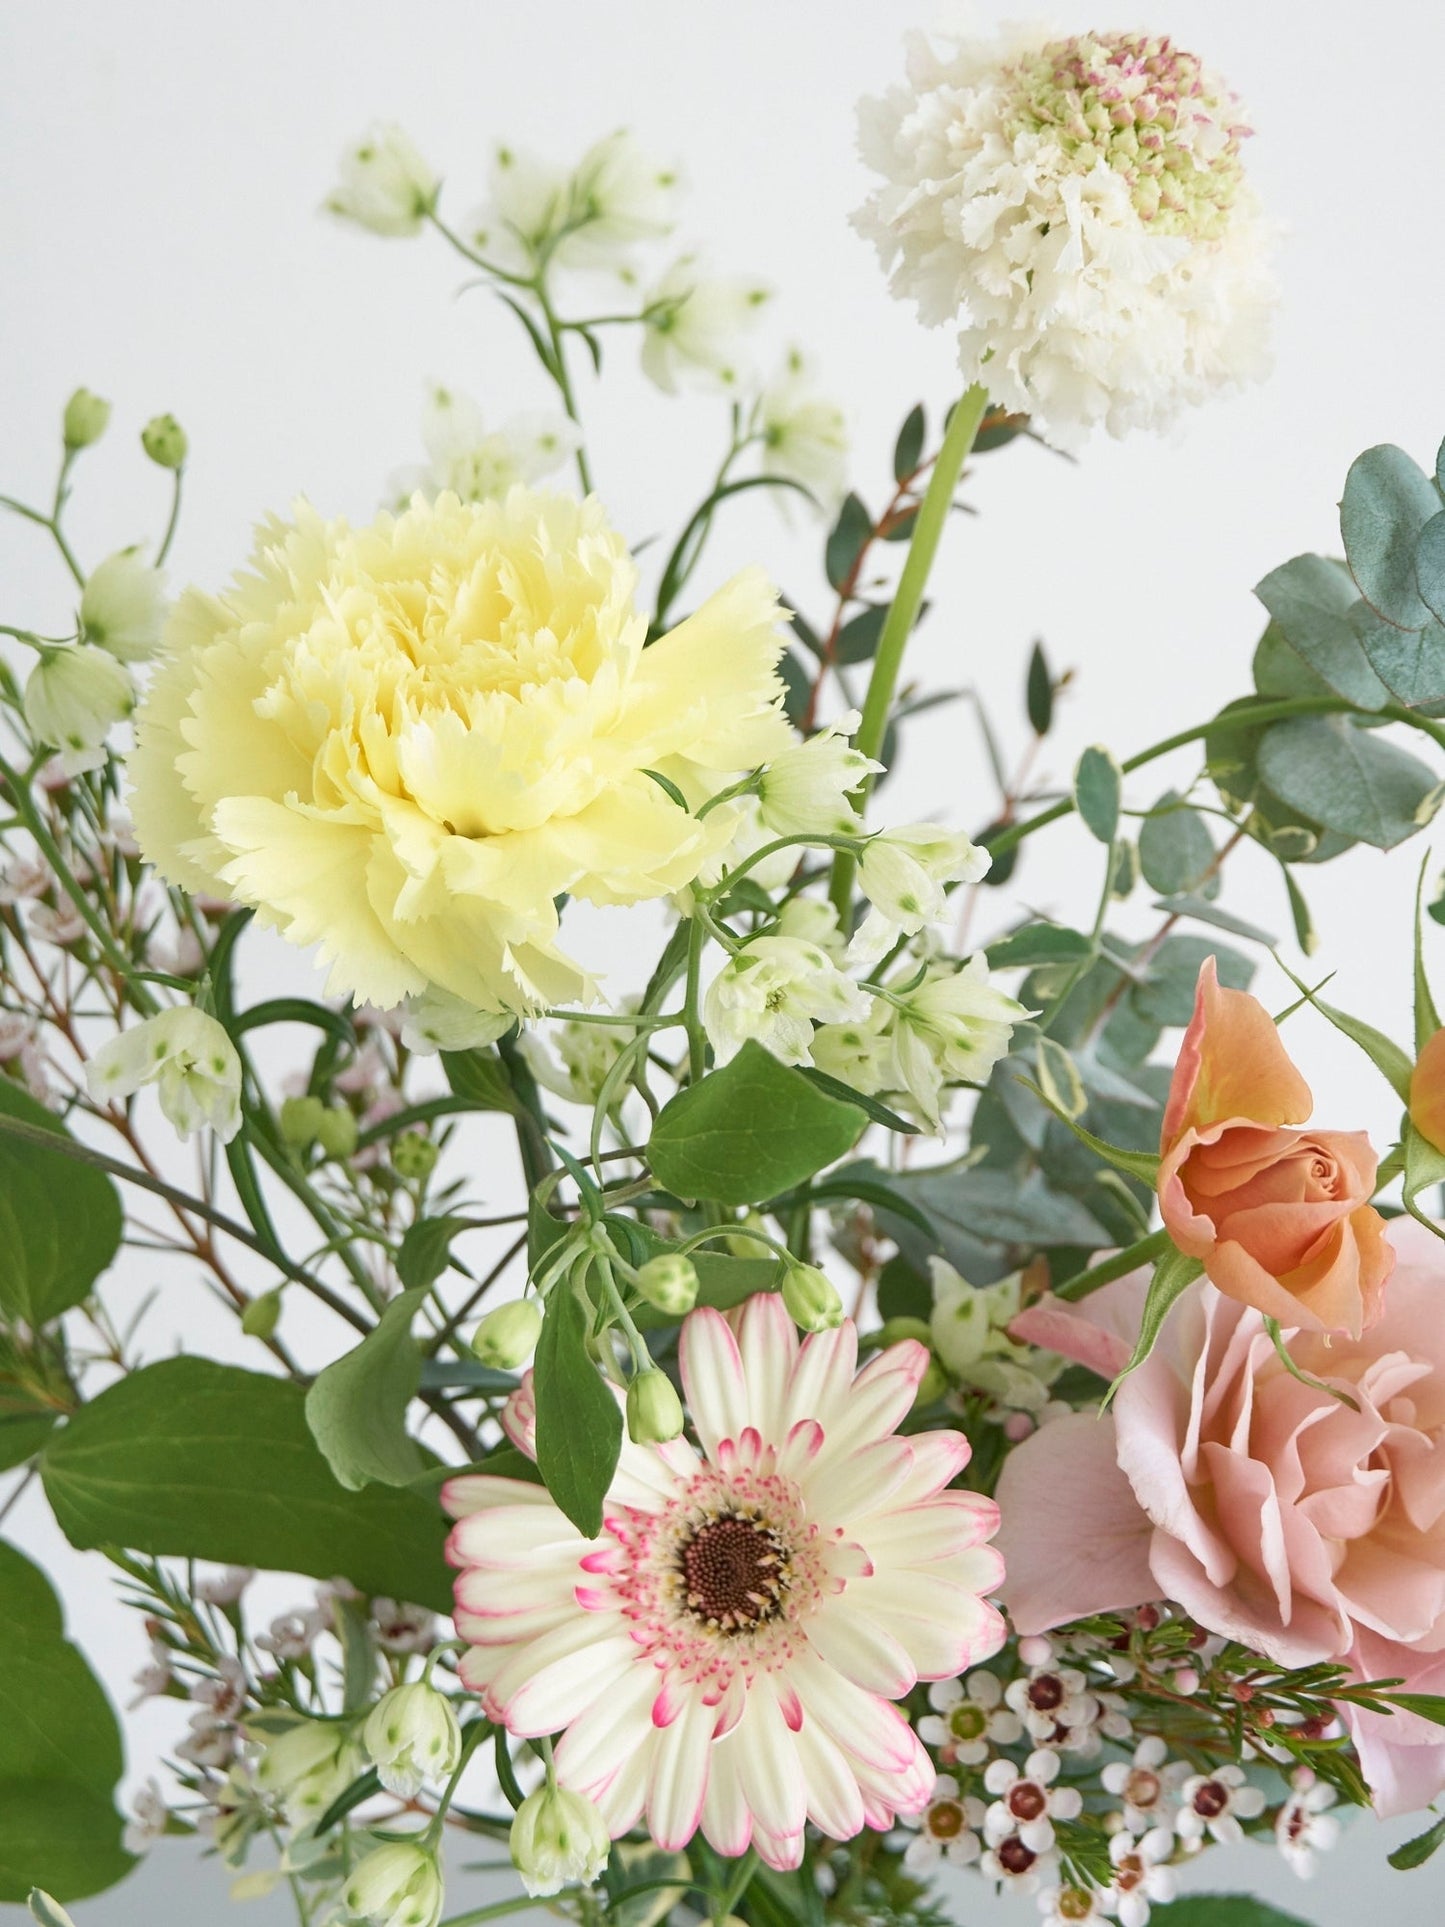 【mother's day】Bouquet S 【Delivery date: 5/11 (Sat)】